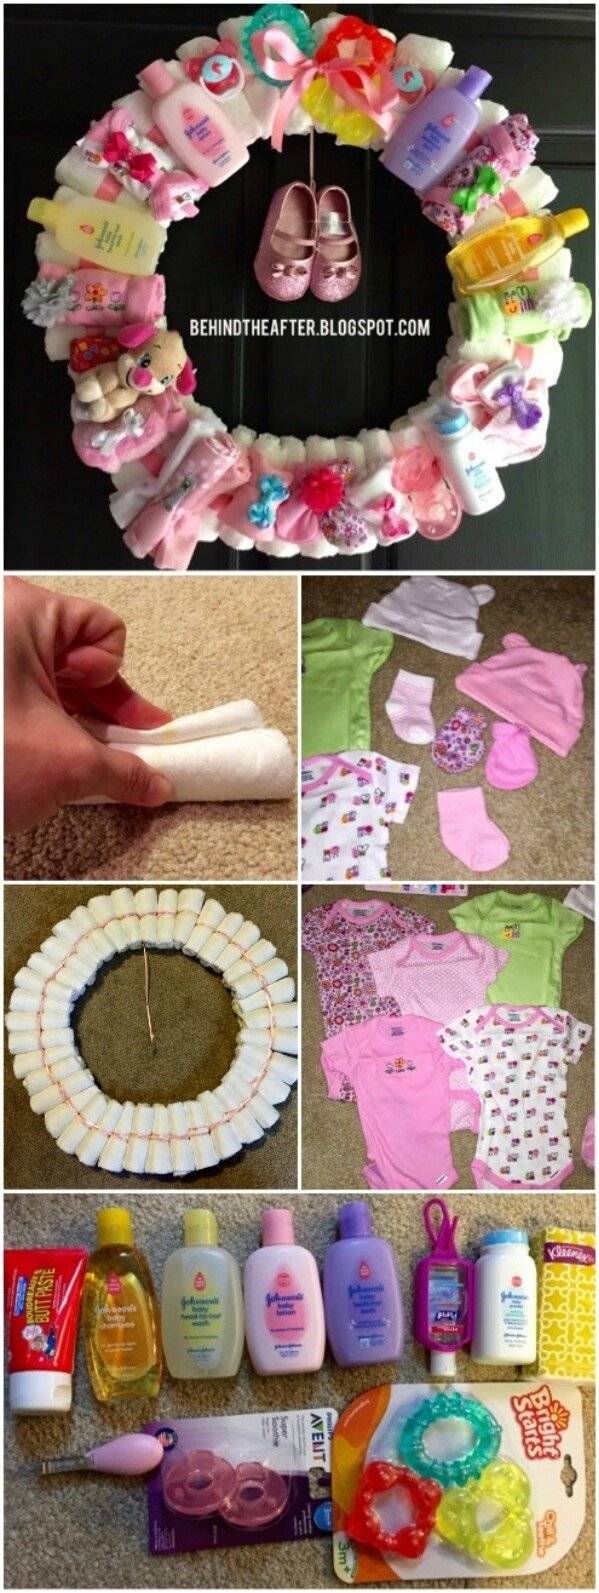 10 Ideal Cute Ideas For Baby Shower Gifts 25 enchantingly adorable baby shower gift ideas that will make you 8 2022